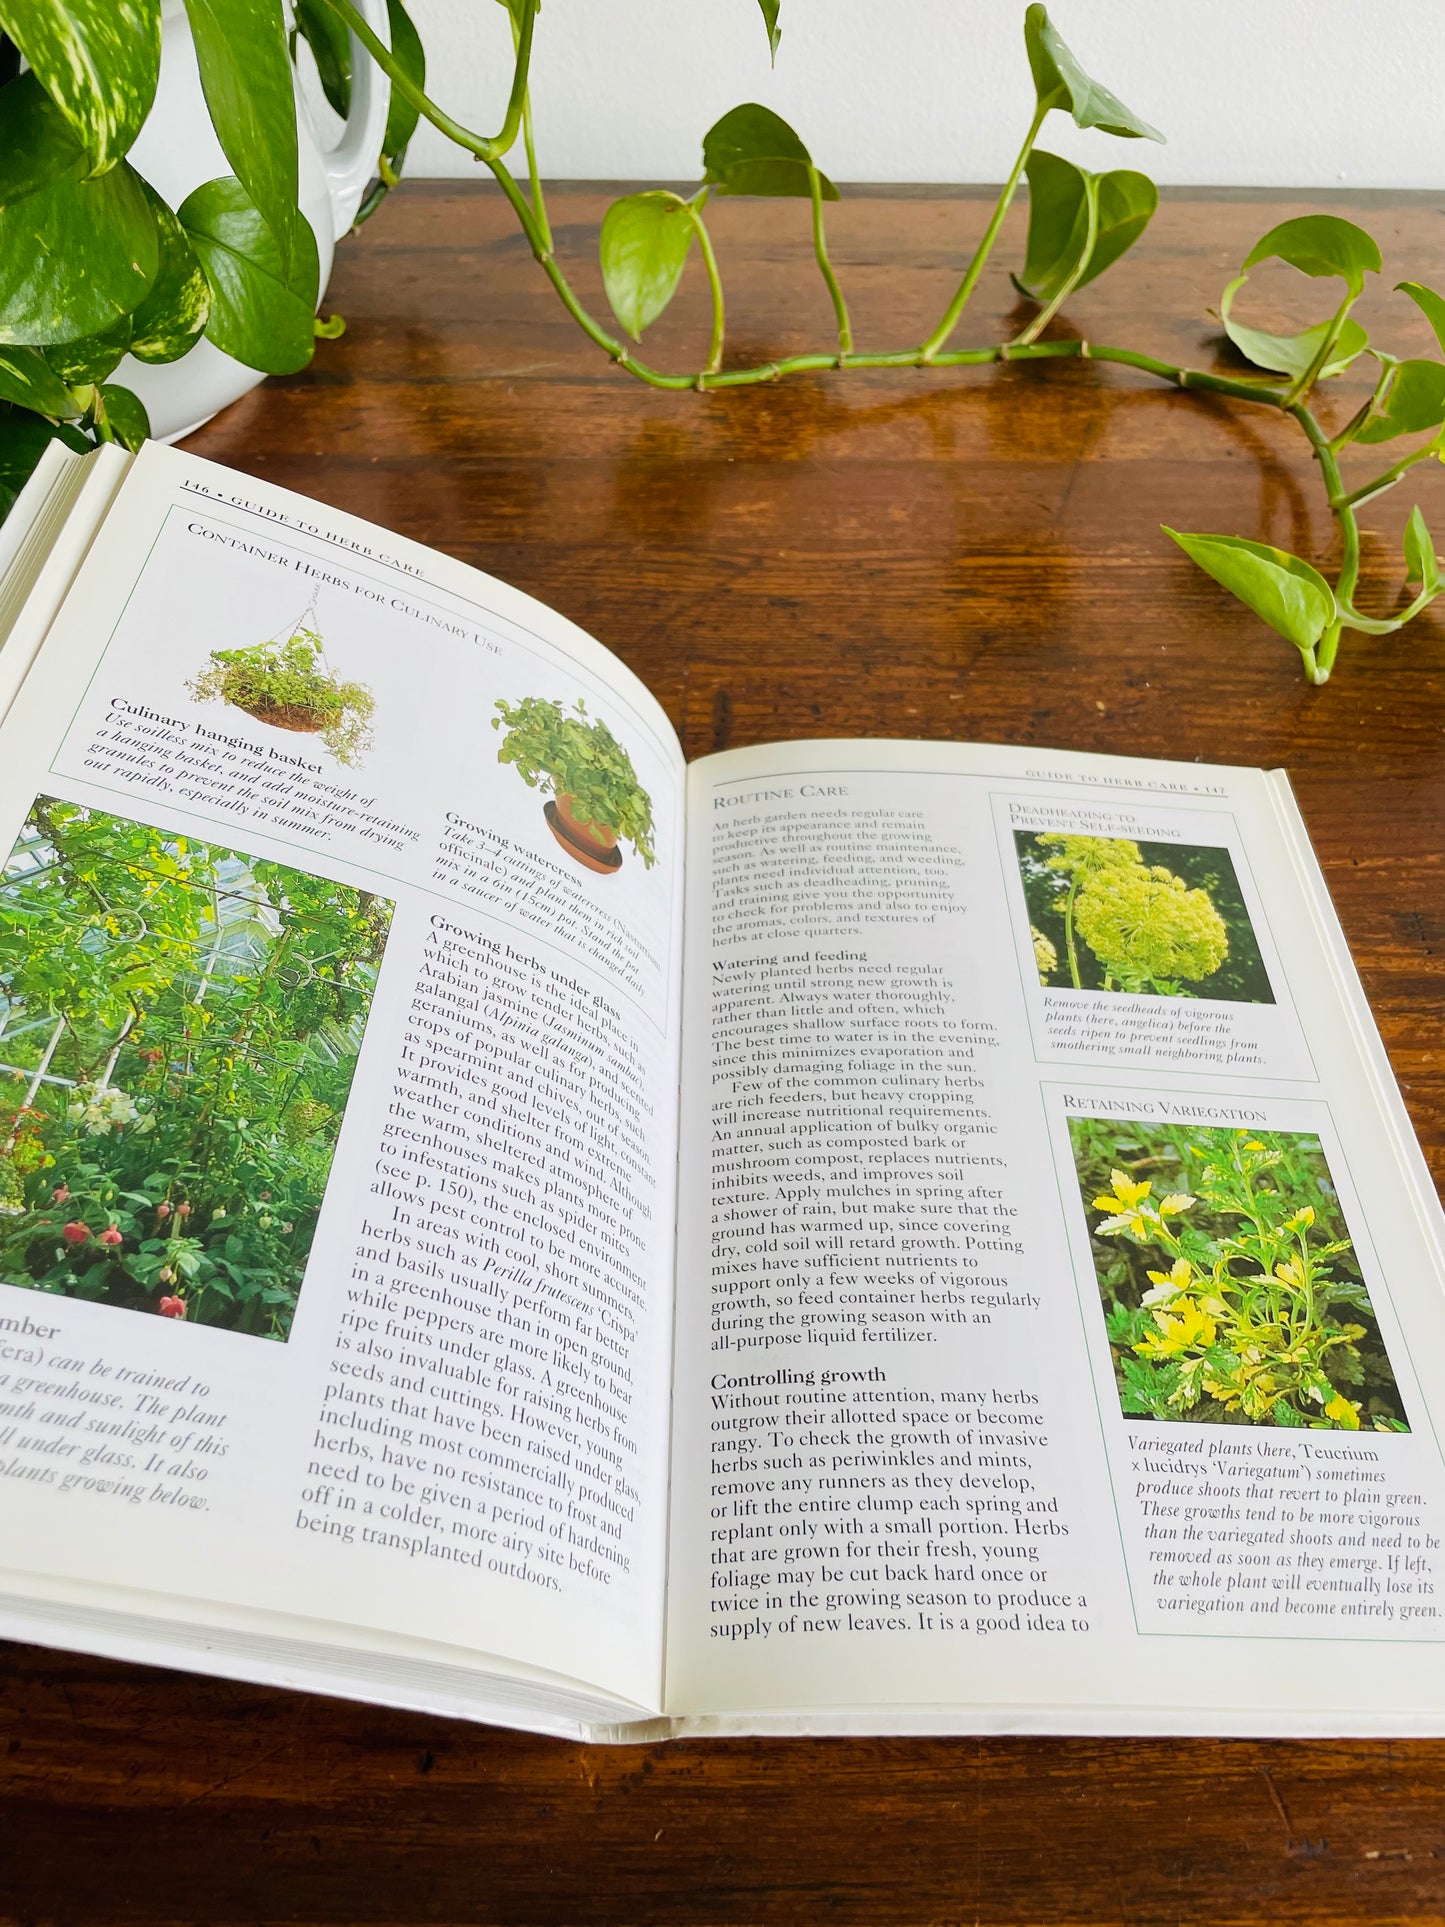 Cavendish Plant Guides Herbs Book (1998)